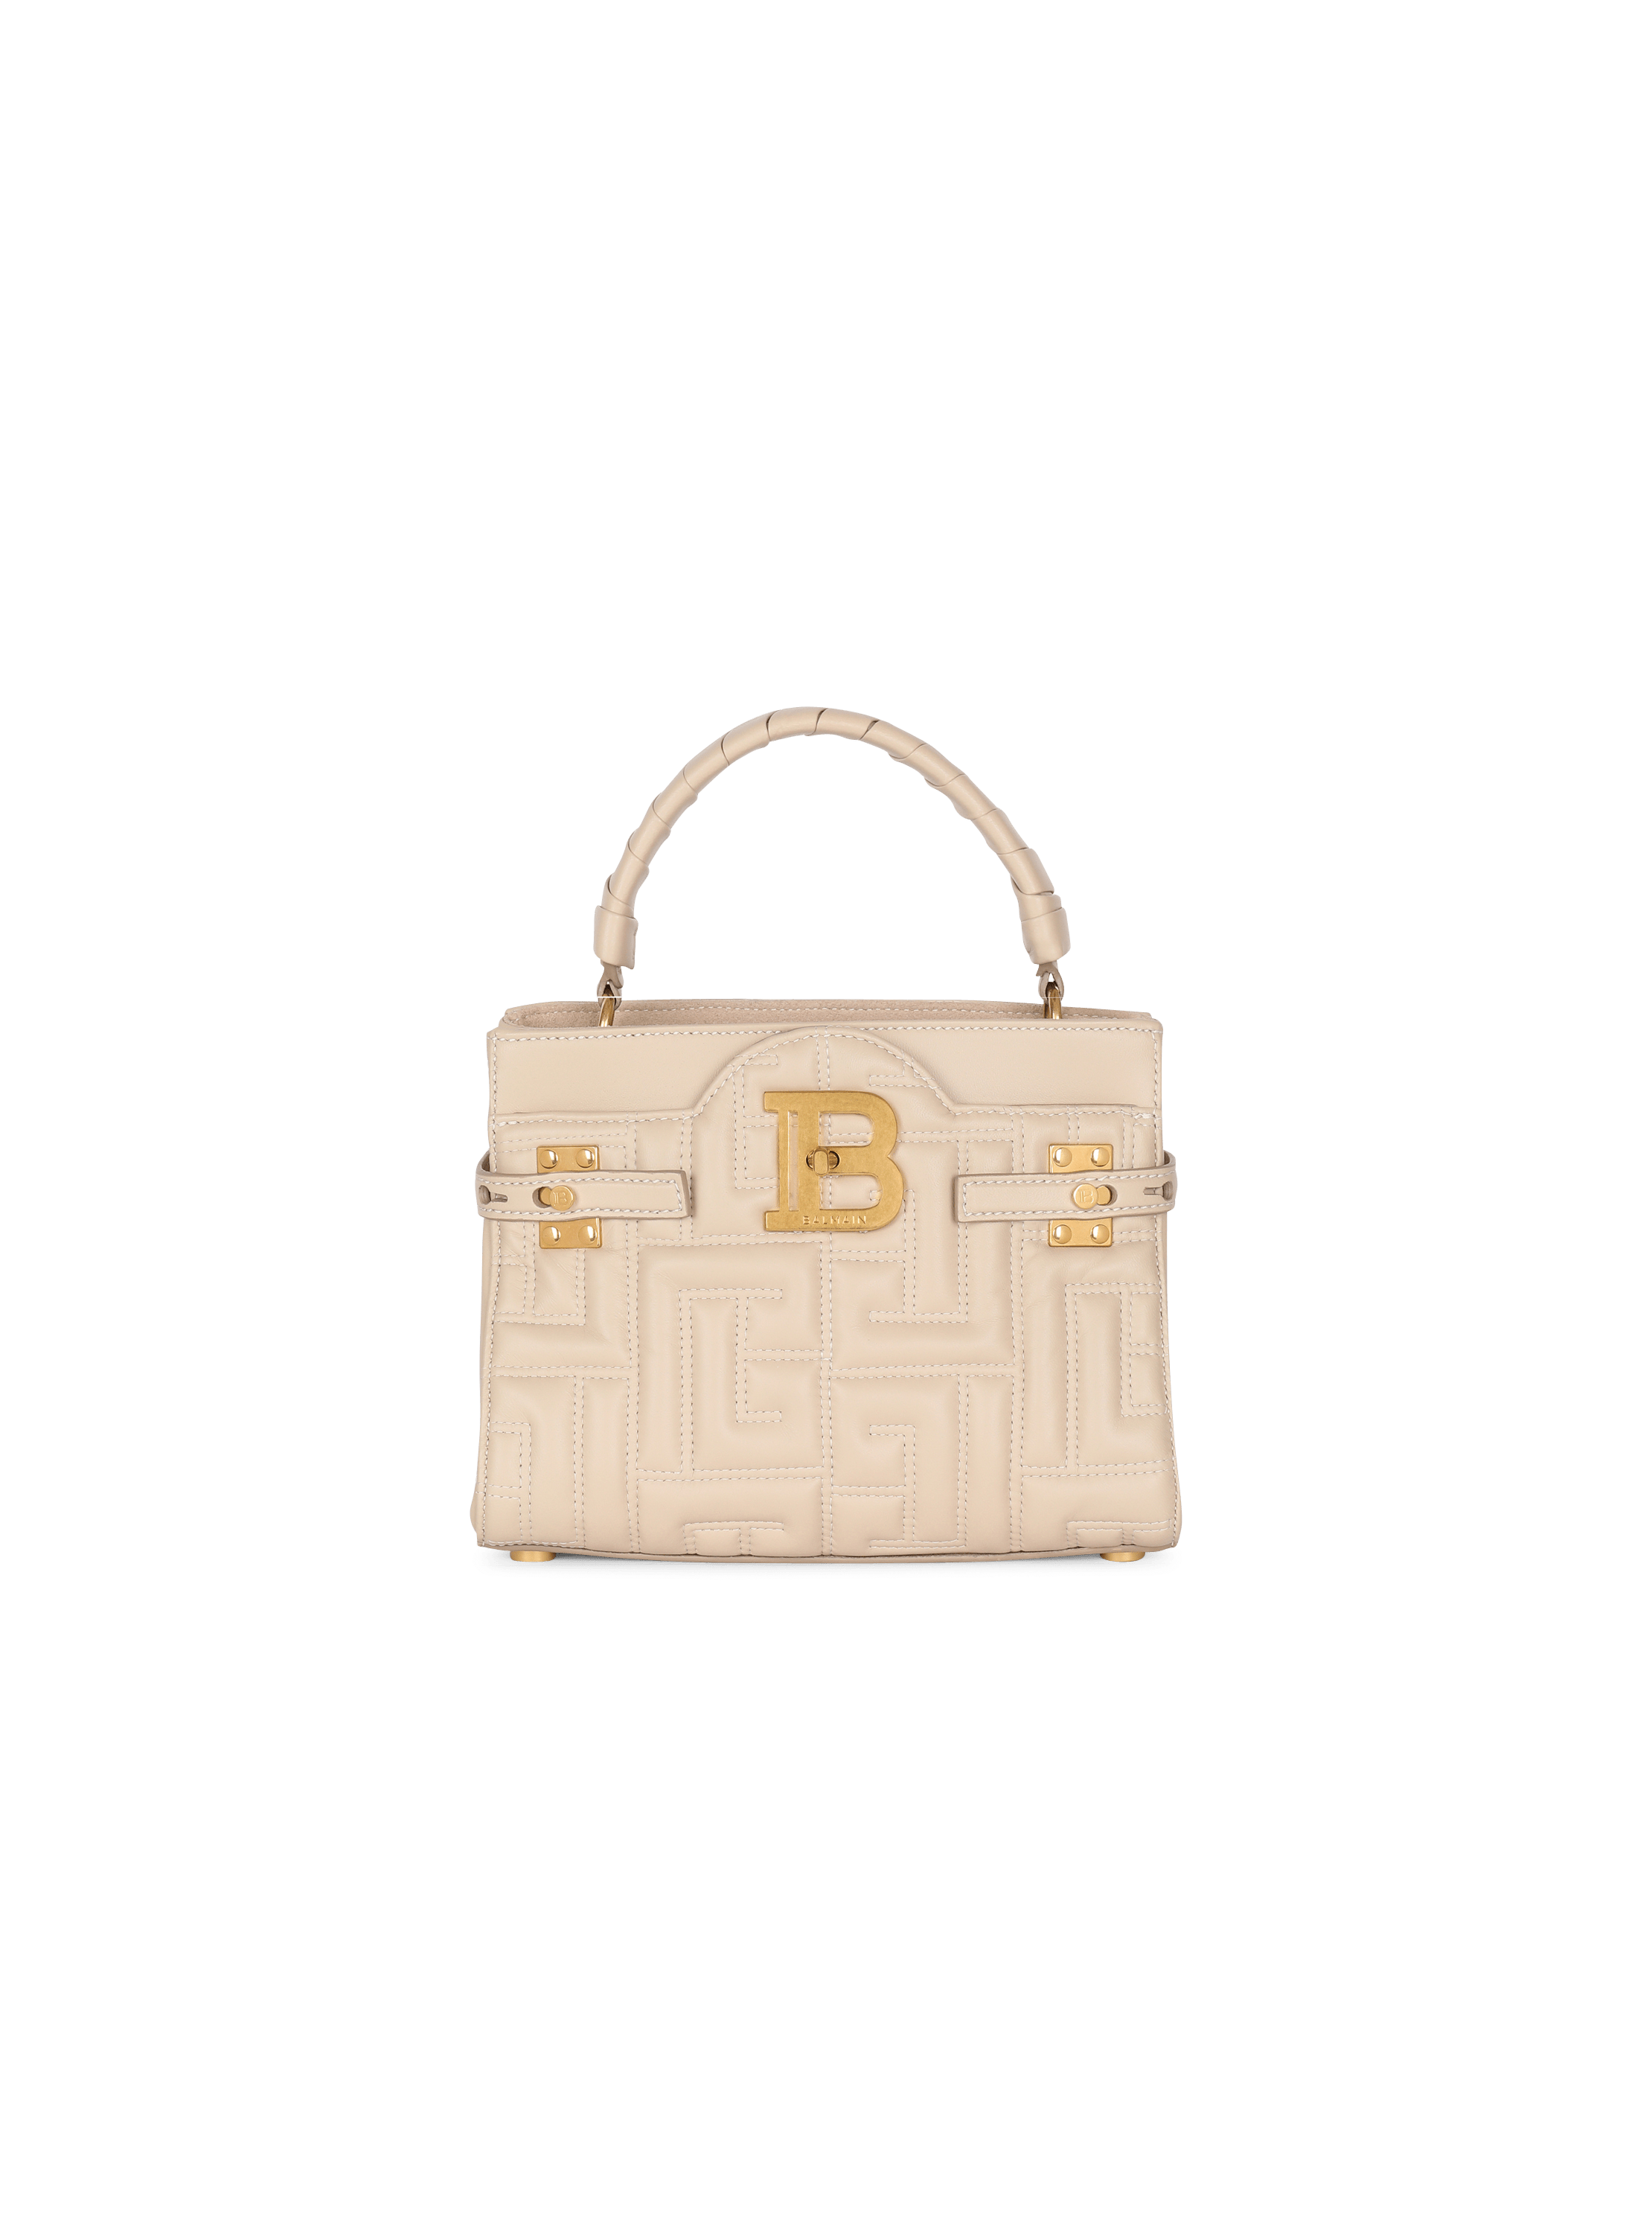 Balmain Quilted Leather B-Buzz 22 Top-Handle Bag